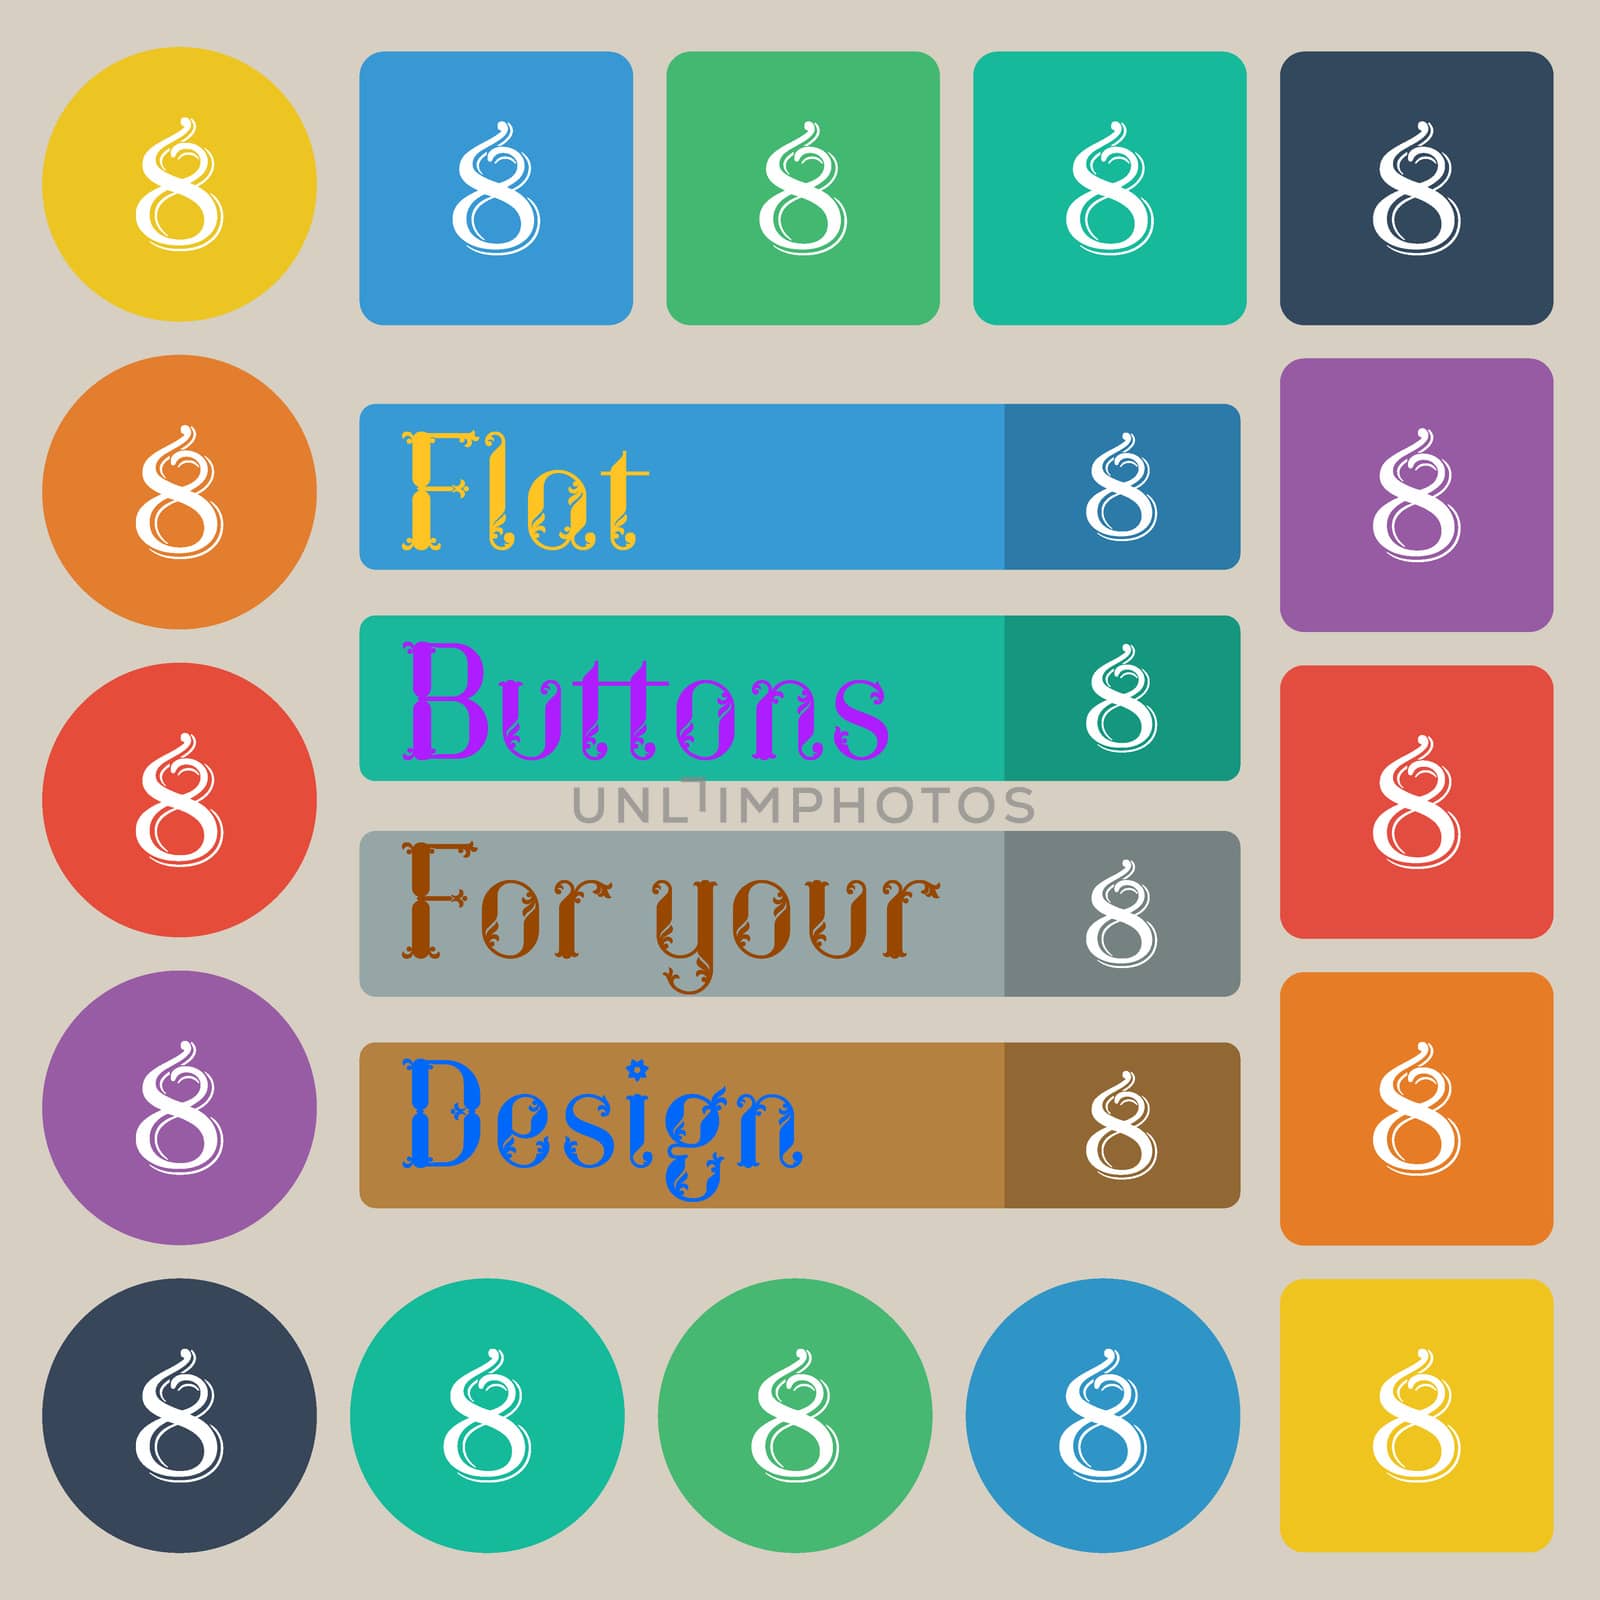 number Eight icon sign. Set of twenty colored flat, round, square and rectangular buttons. illustration